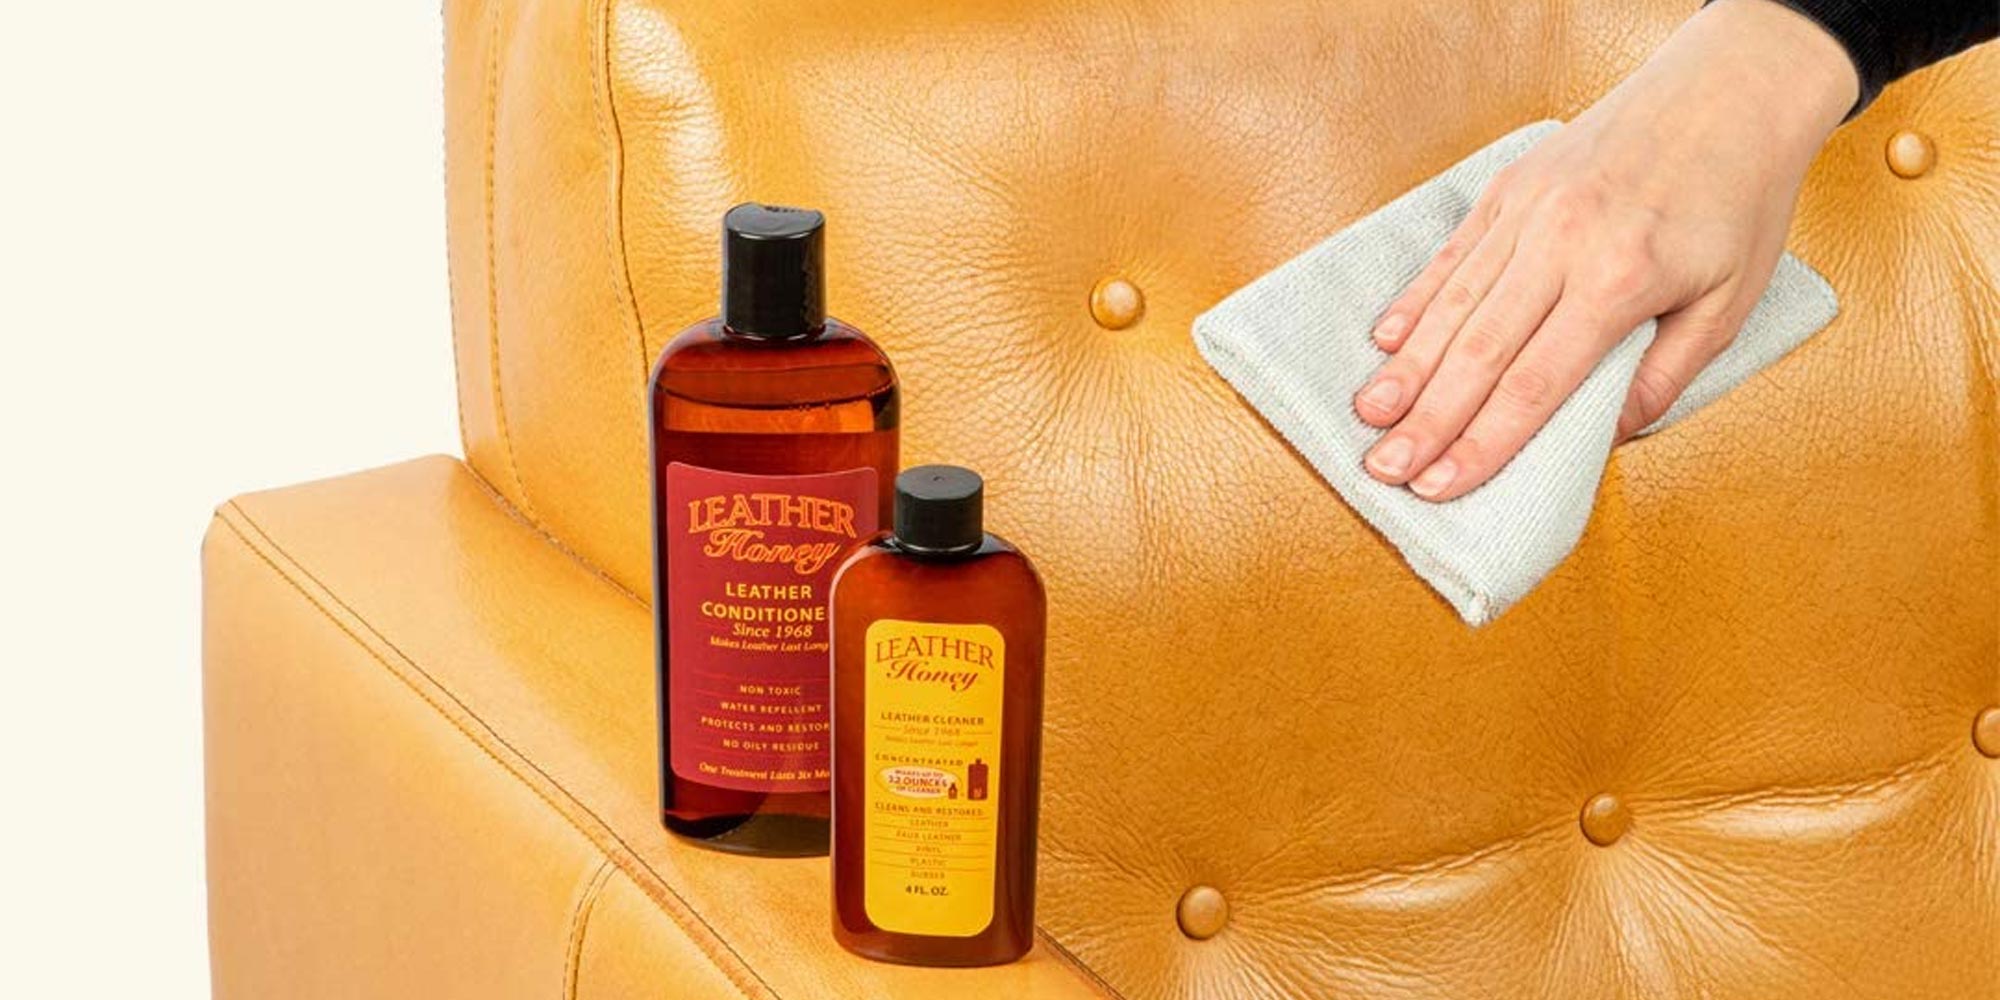 leather conditioner for sofa reviews